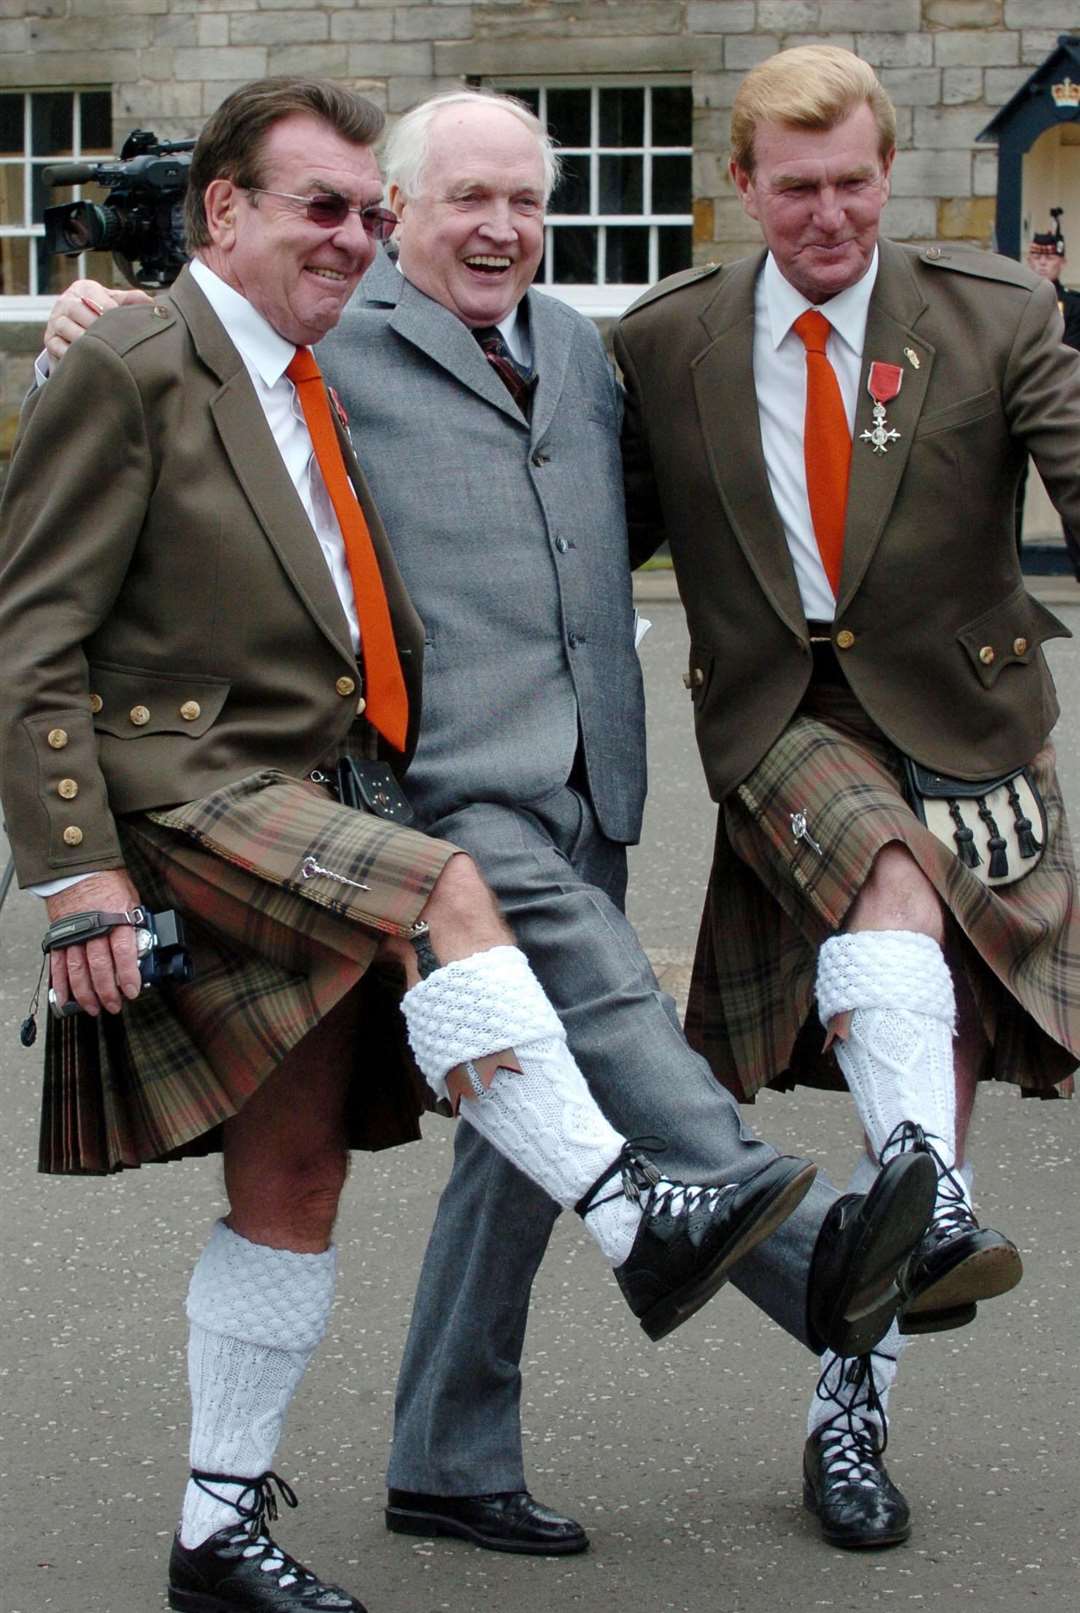 George Wyllie, centre, celebrates with Thomas and Jack Alexander after being made an MBE in 2005 (PA)